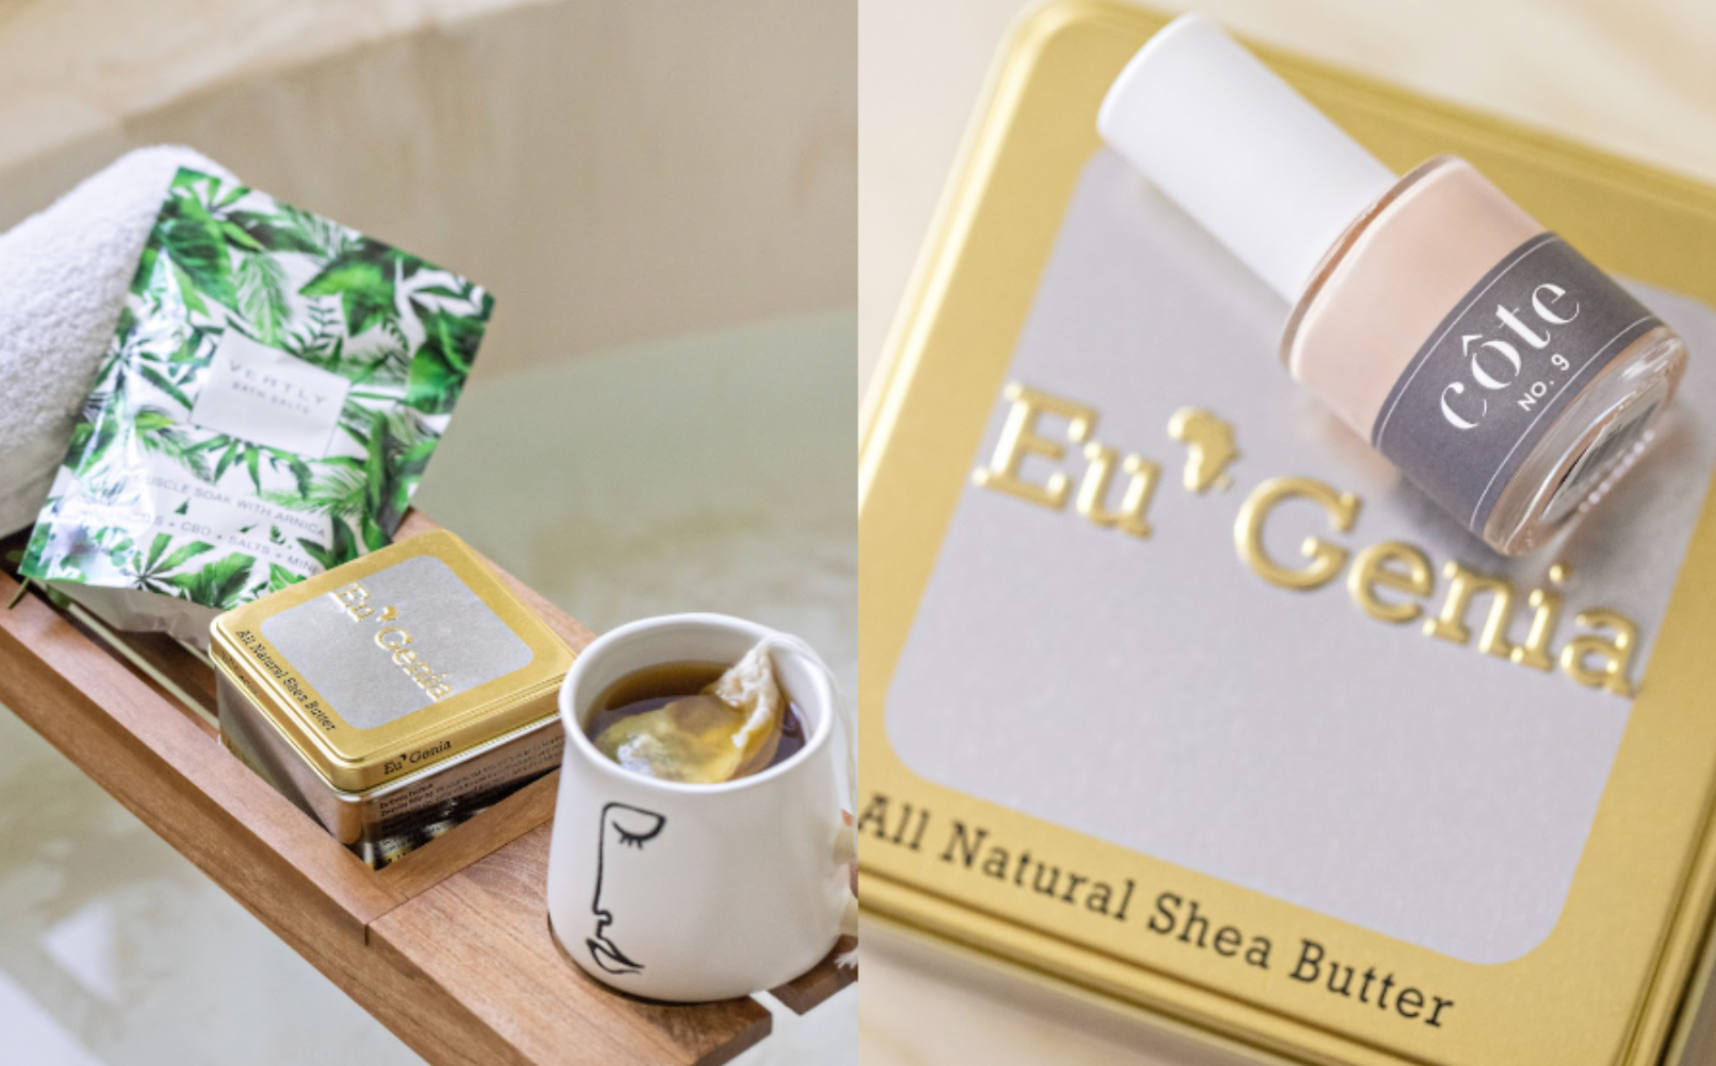 Eu'Genia Tin with Nail Polish on right image and with a mug of tea and other products above a bath on the left